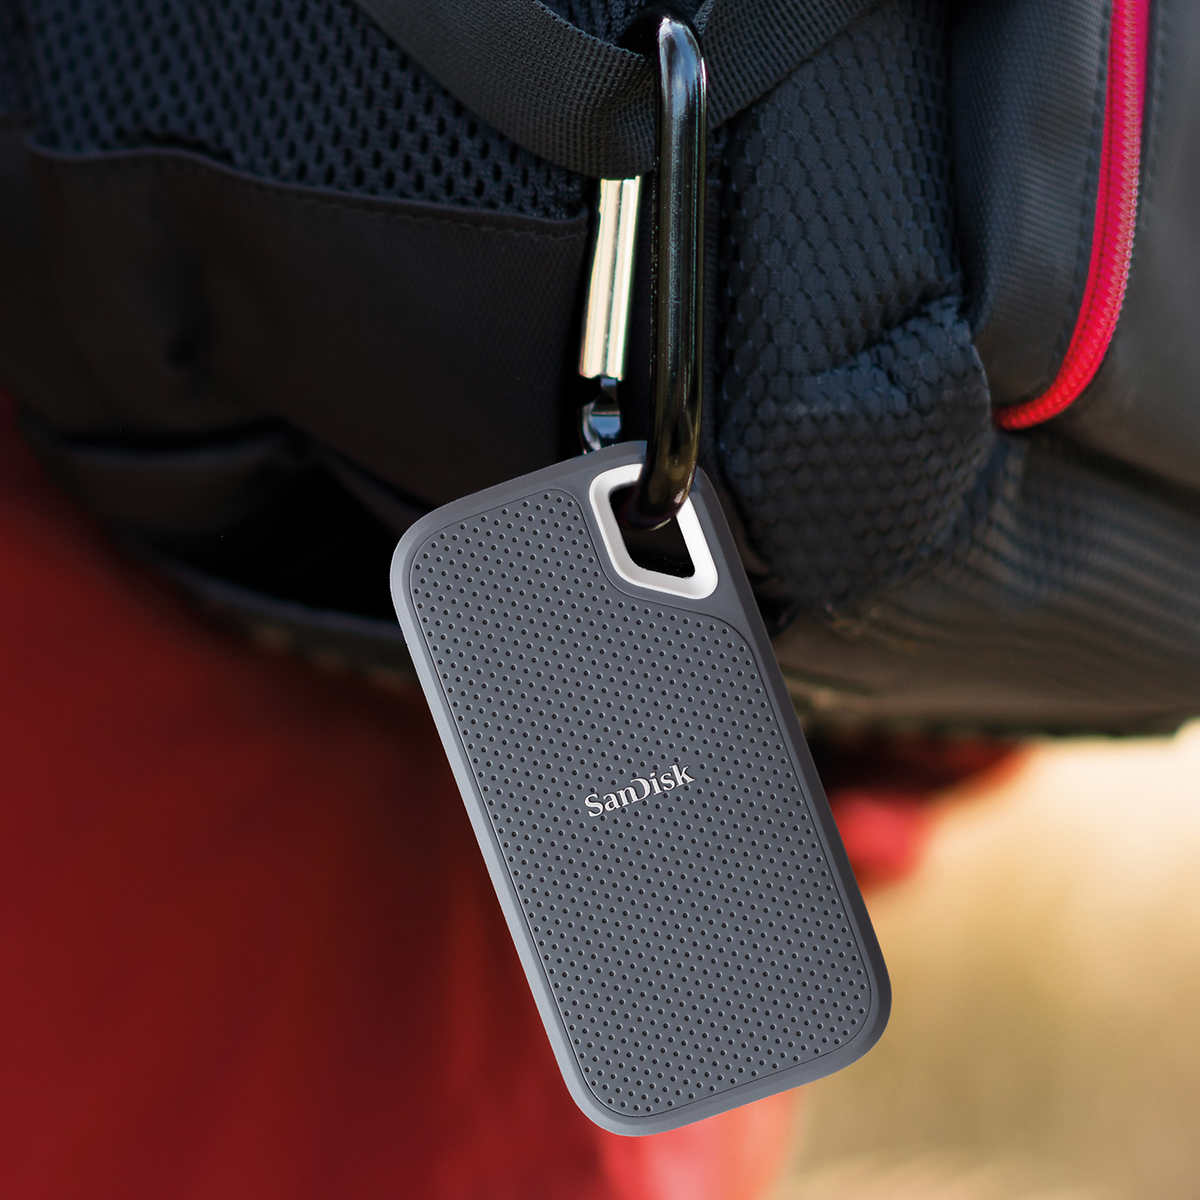 SanDisk Extreme 1TB Portable Solid State Drive $119.99